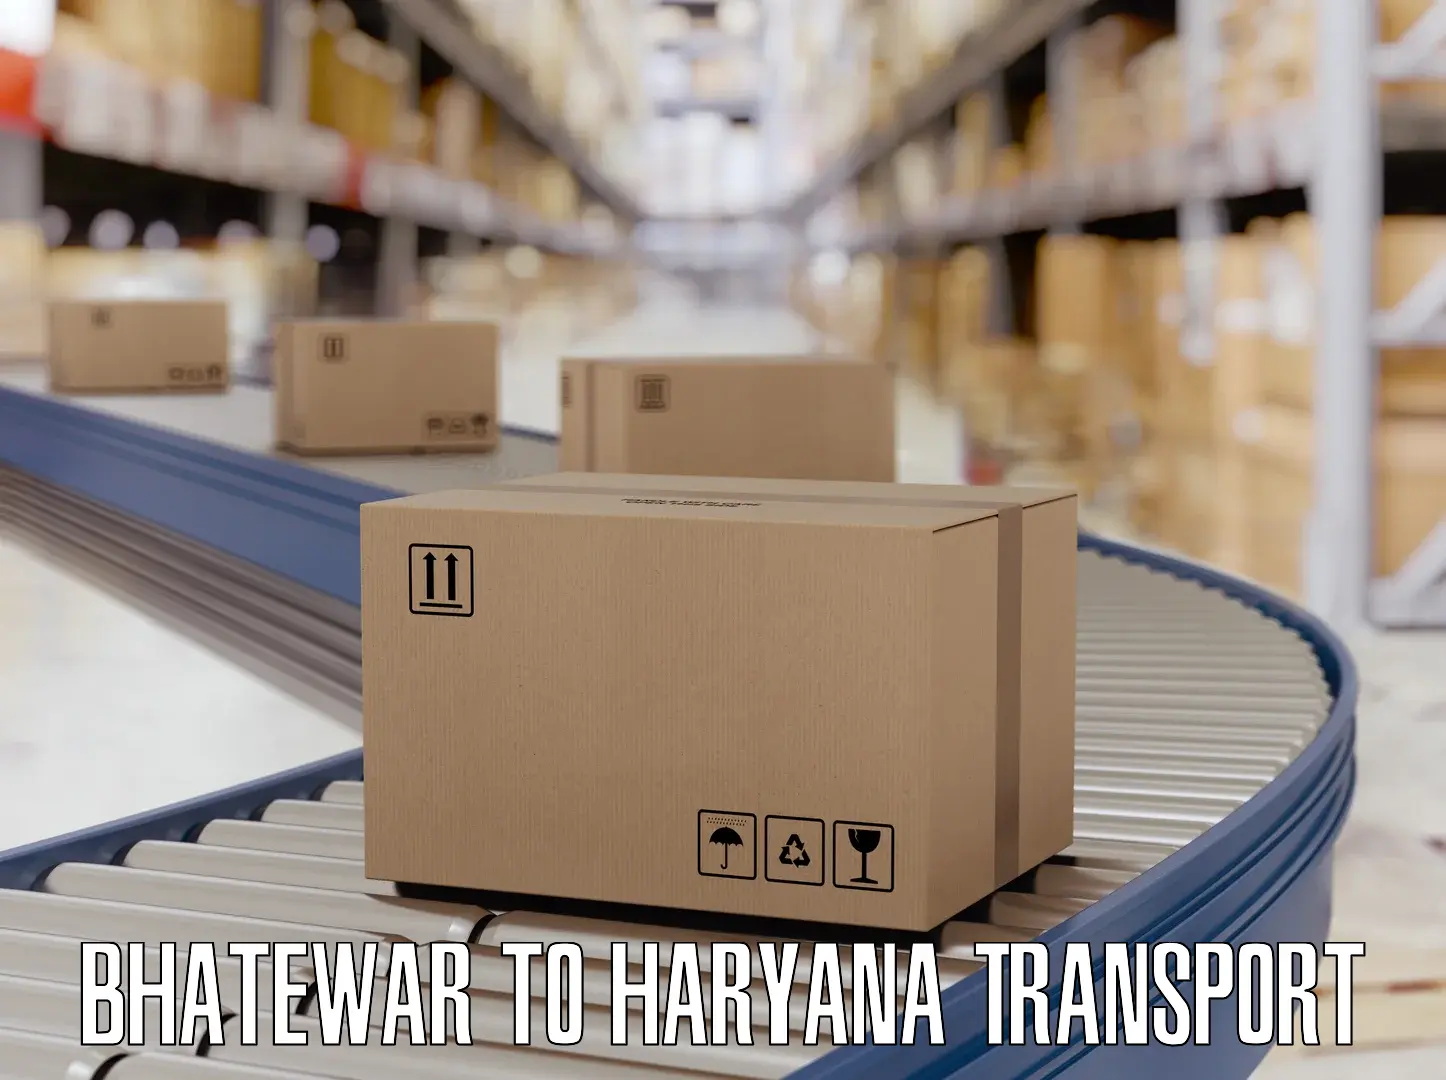 Container transport service Bhatewar to Haryana